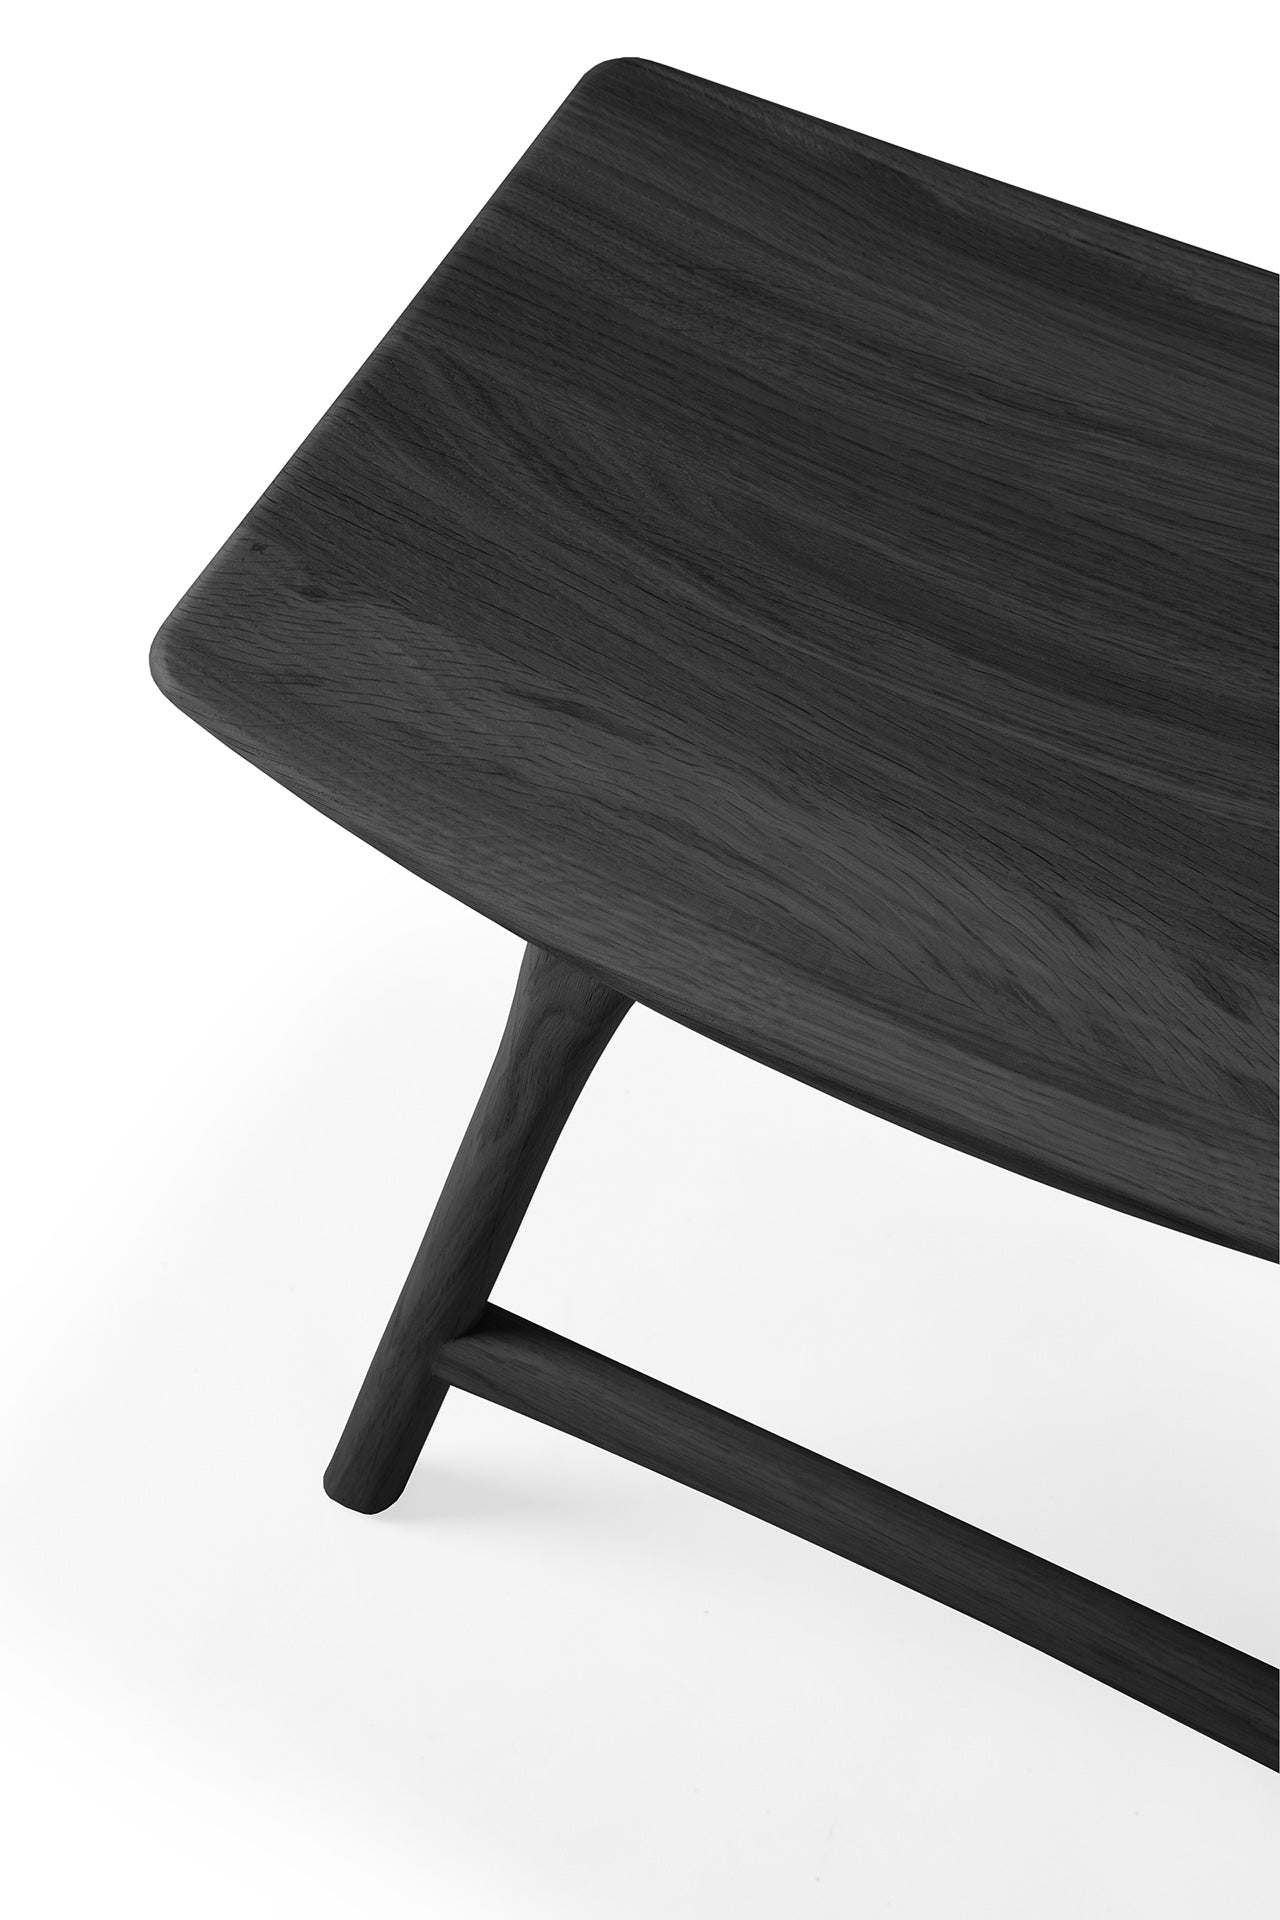 Osso Stool Black by Ethnicraft detail photo